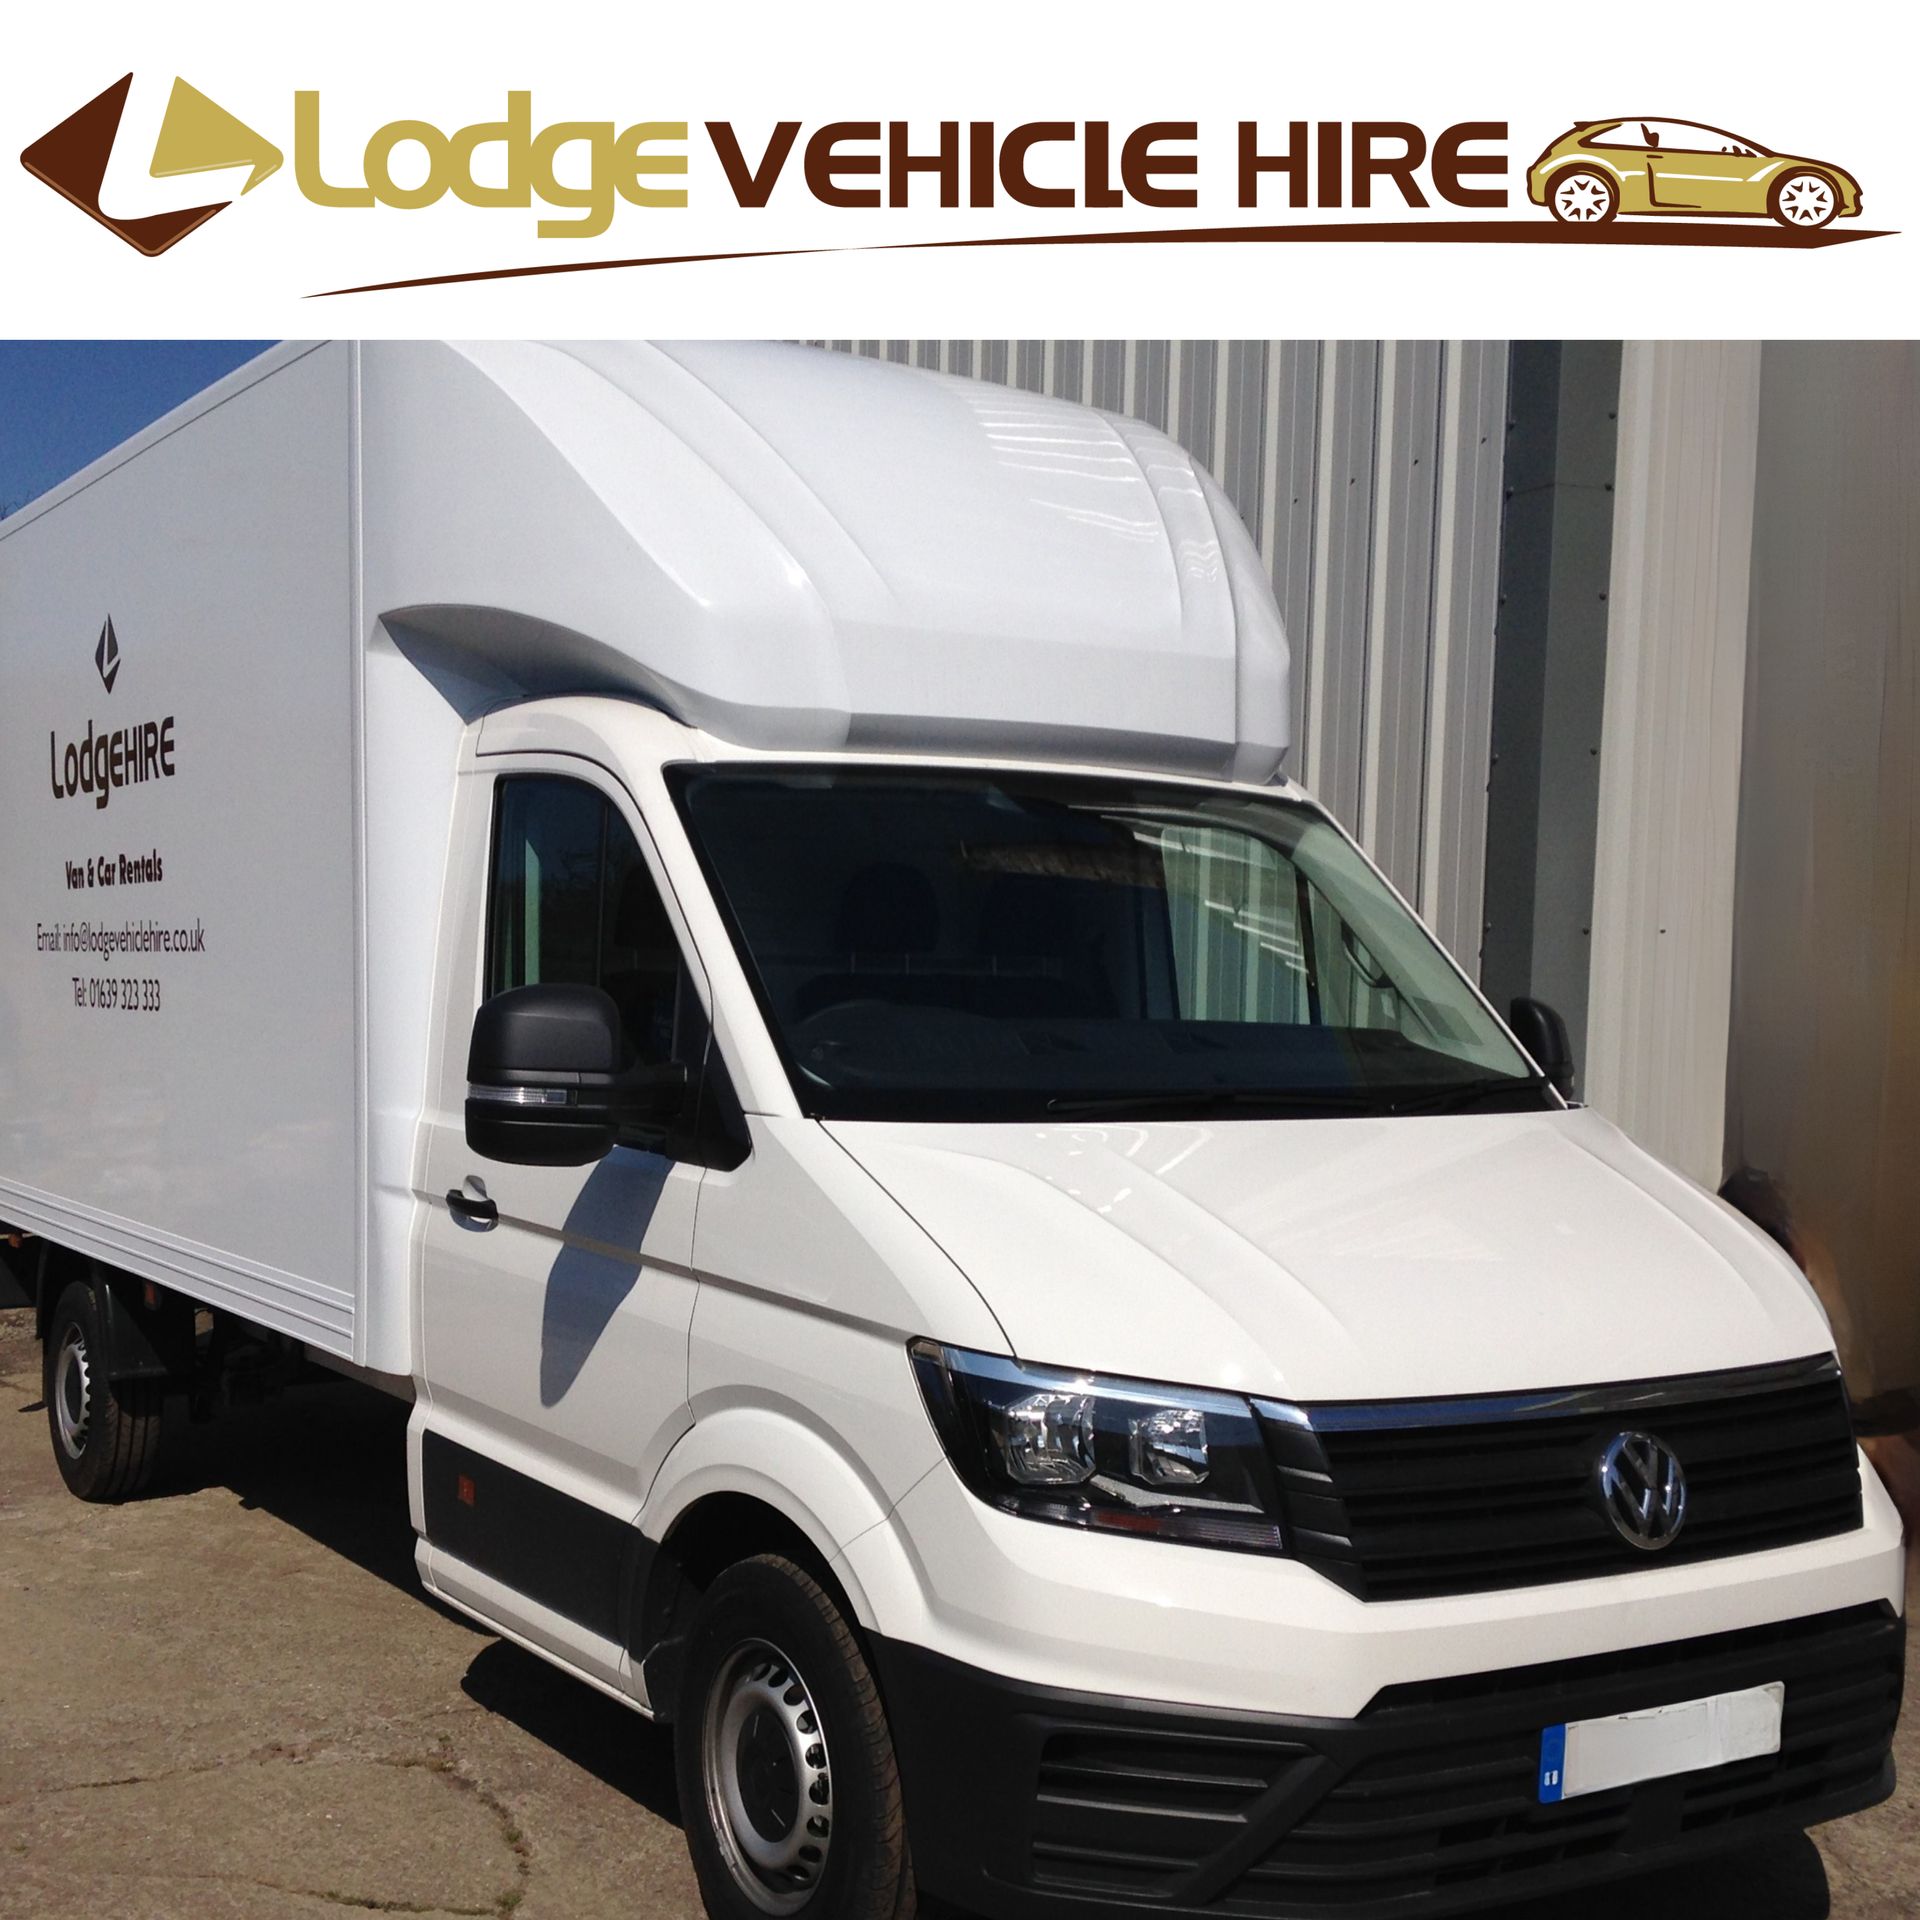 Rental vans for Luton at 77 pounds per day